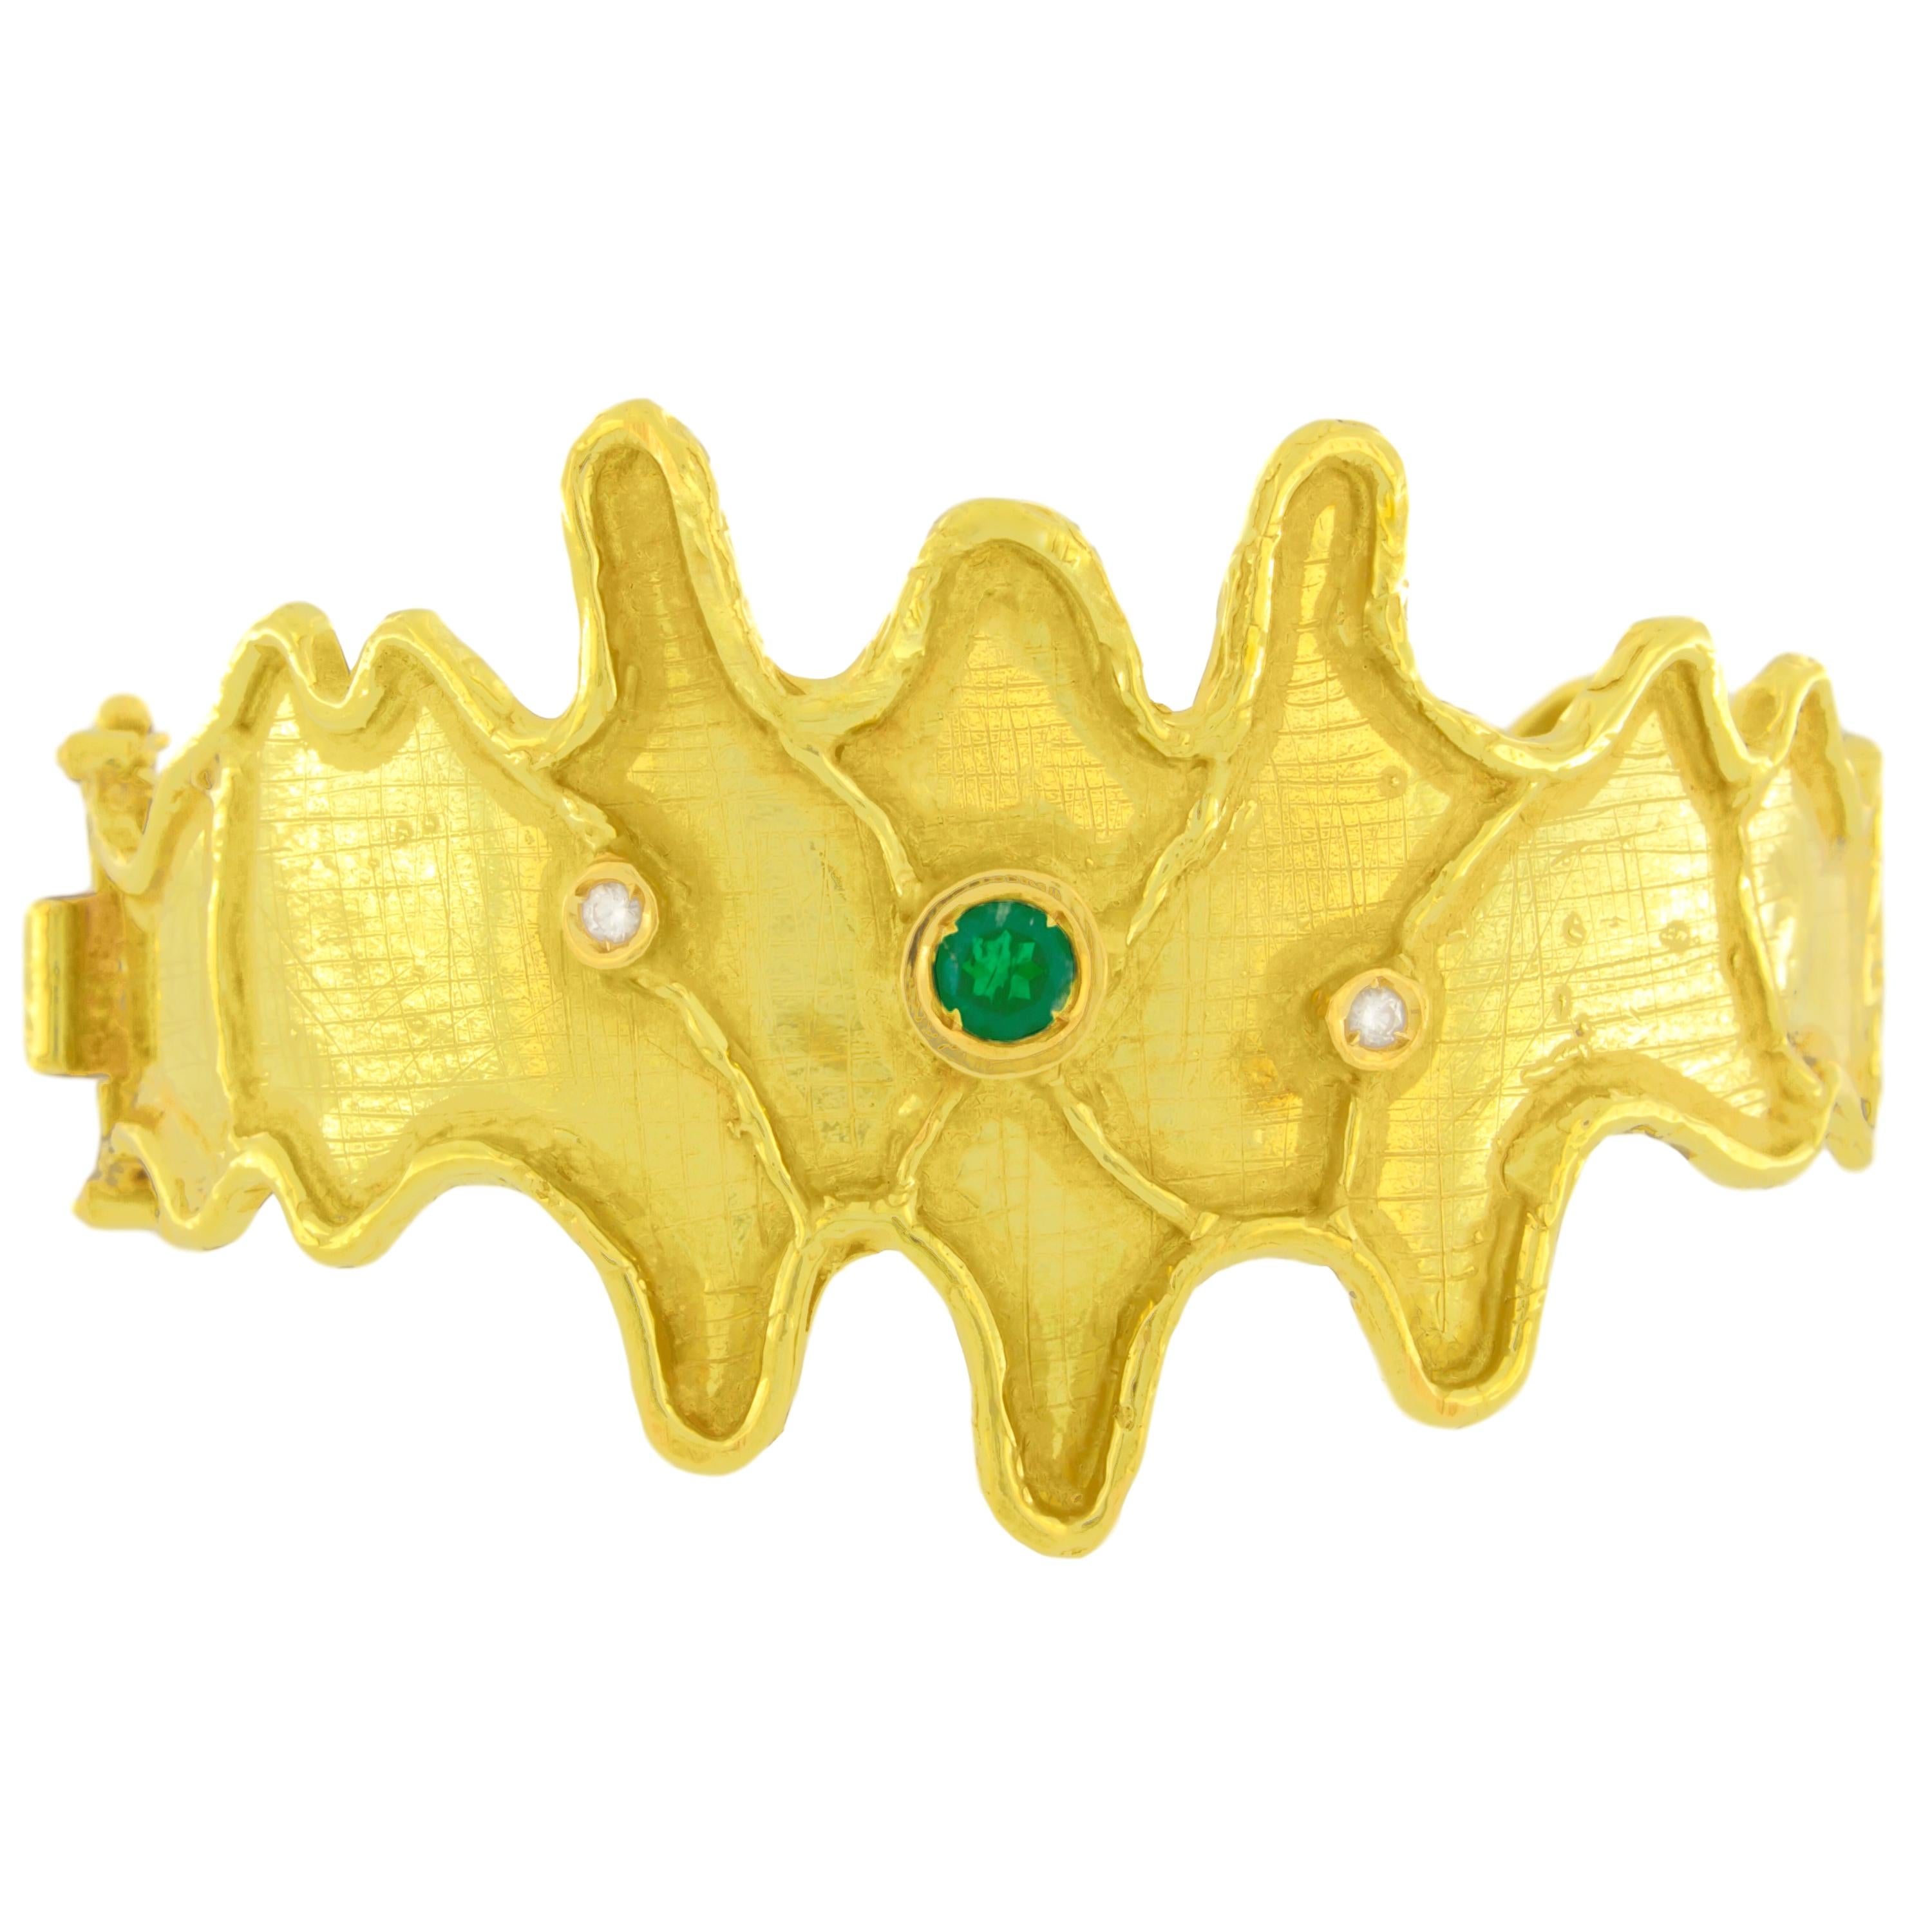 Gorgeous Emerald and Diamonds Satin Yellow Gold Cuff Bracelet, from Sacchi’s “Abstract” Collection, hand-crafted with lost-wax casting technique.

Lost-wax casting, one of the oldest techniques for creating jewelry, forms the basis of Sacchi's